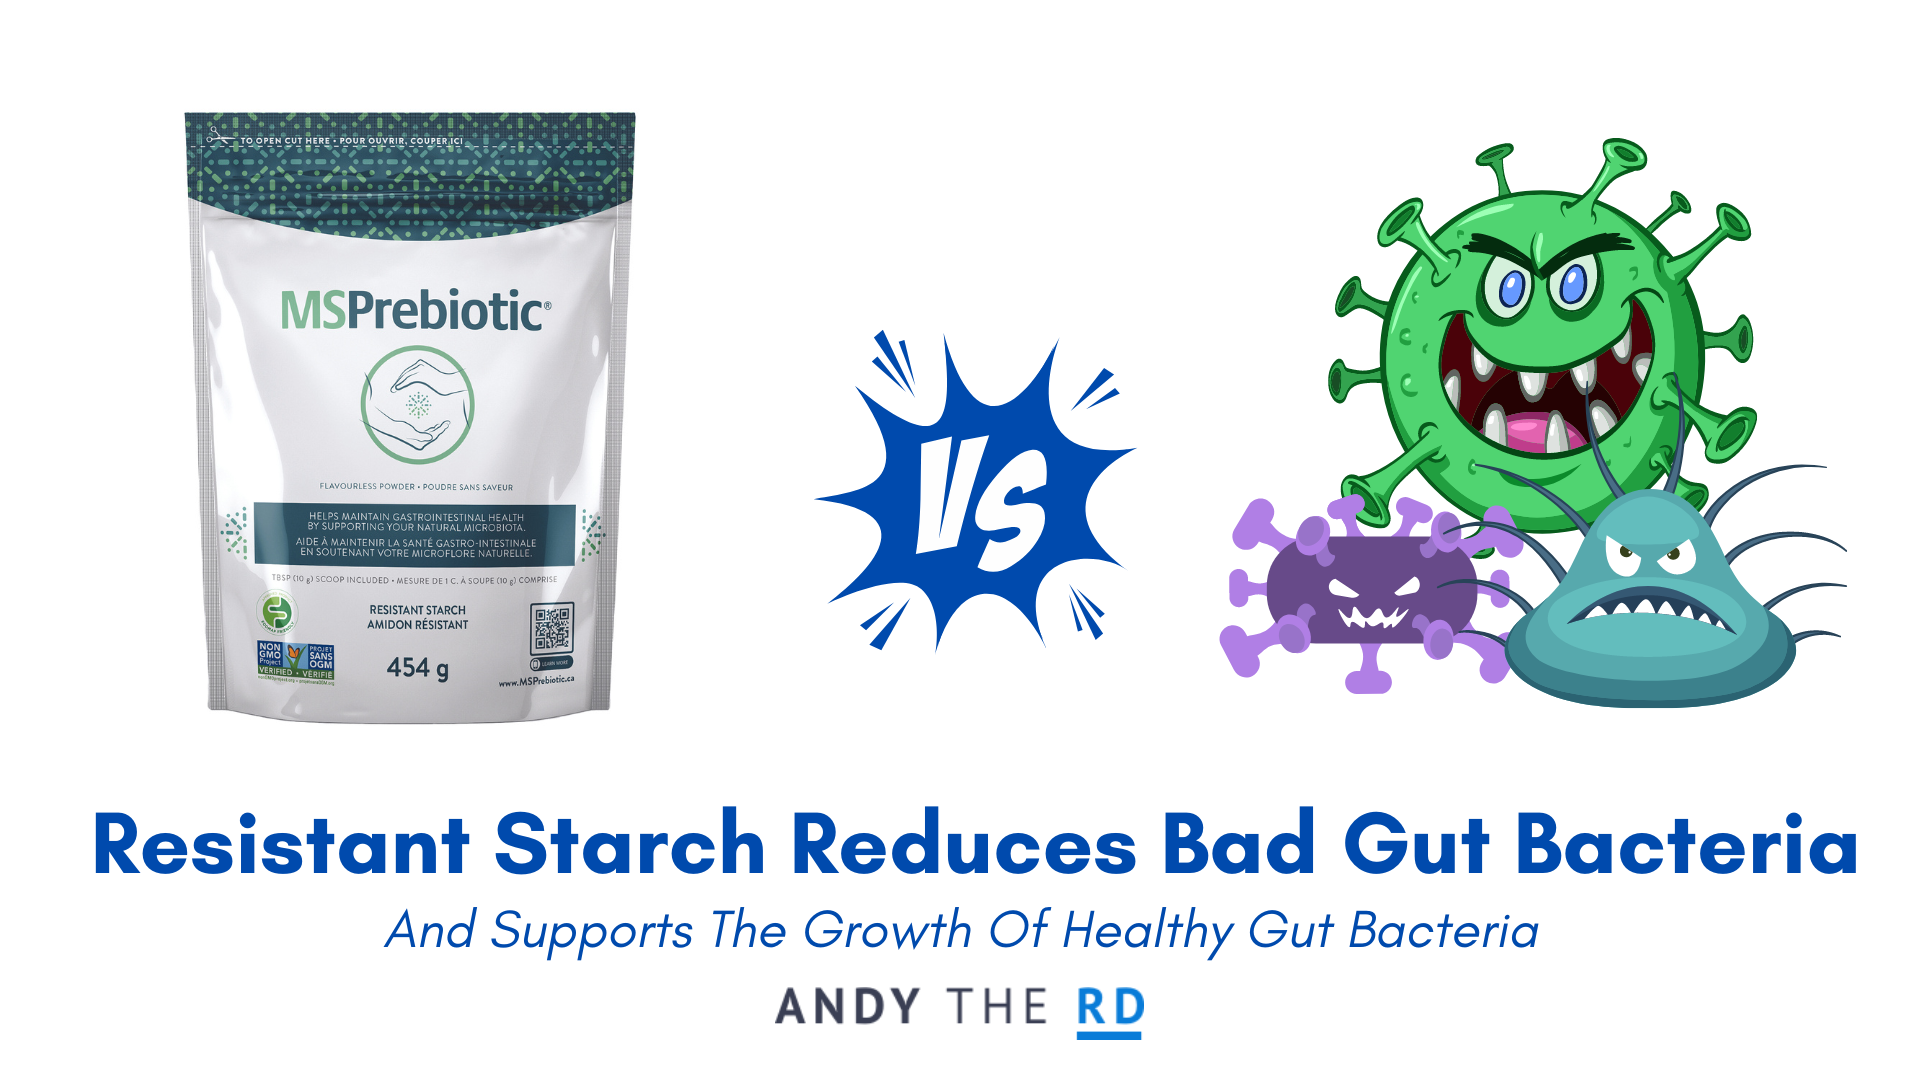 Resistant Starch Reduces Your “Bad” Gut Bacteria